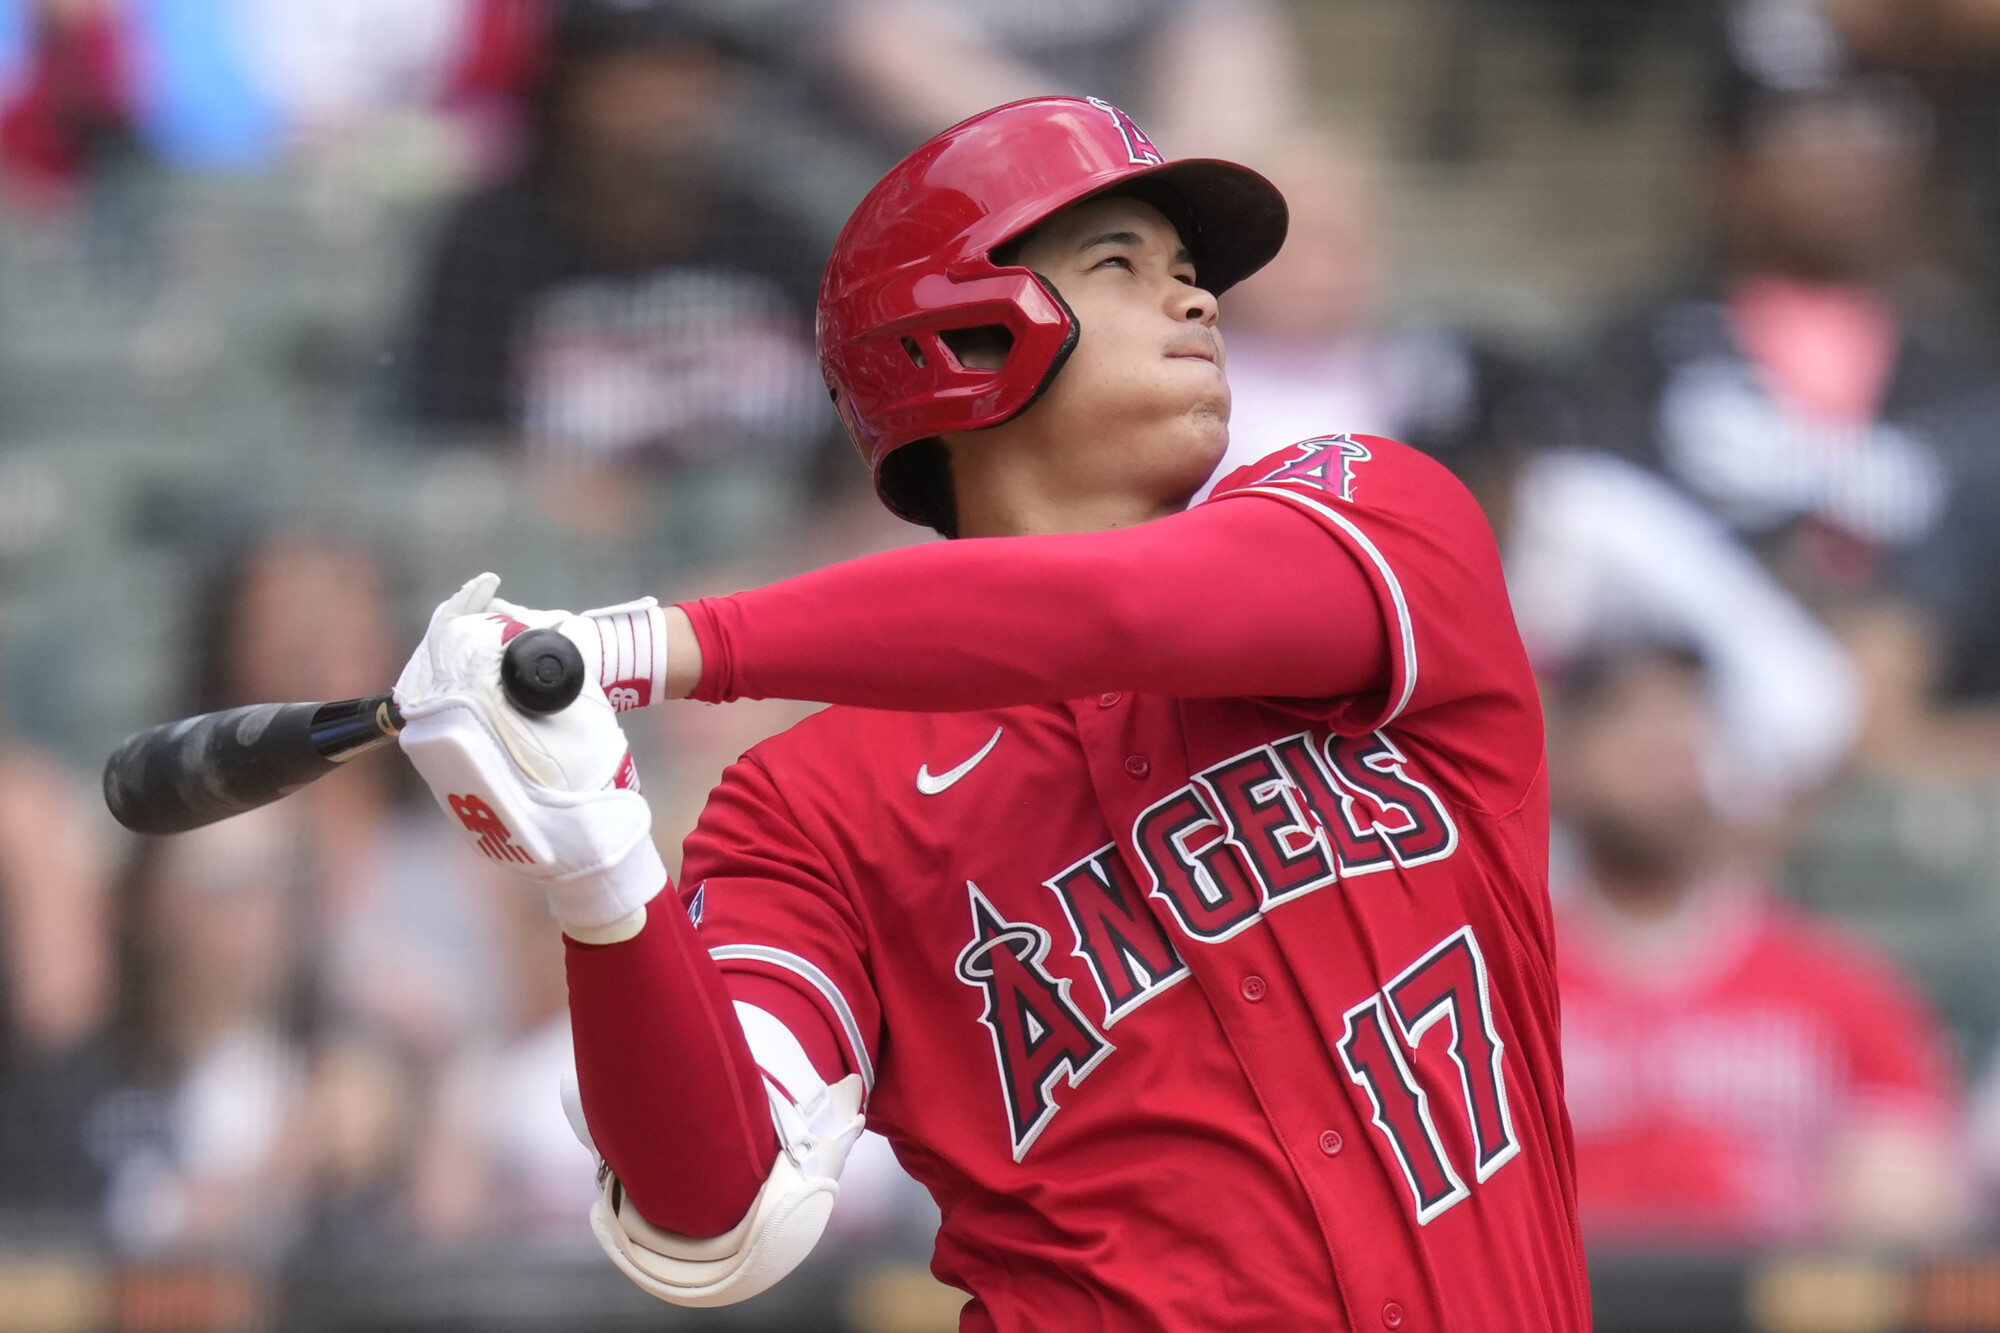 MLB roundup: Ohtani homers twice as Angels rip White Sox, 12-5